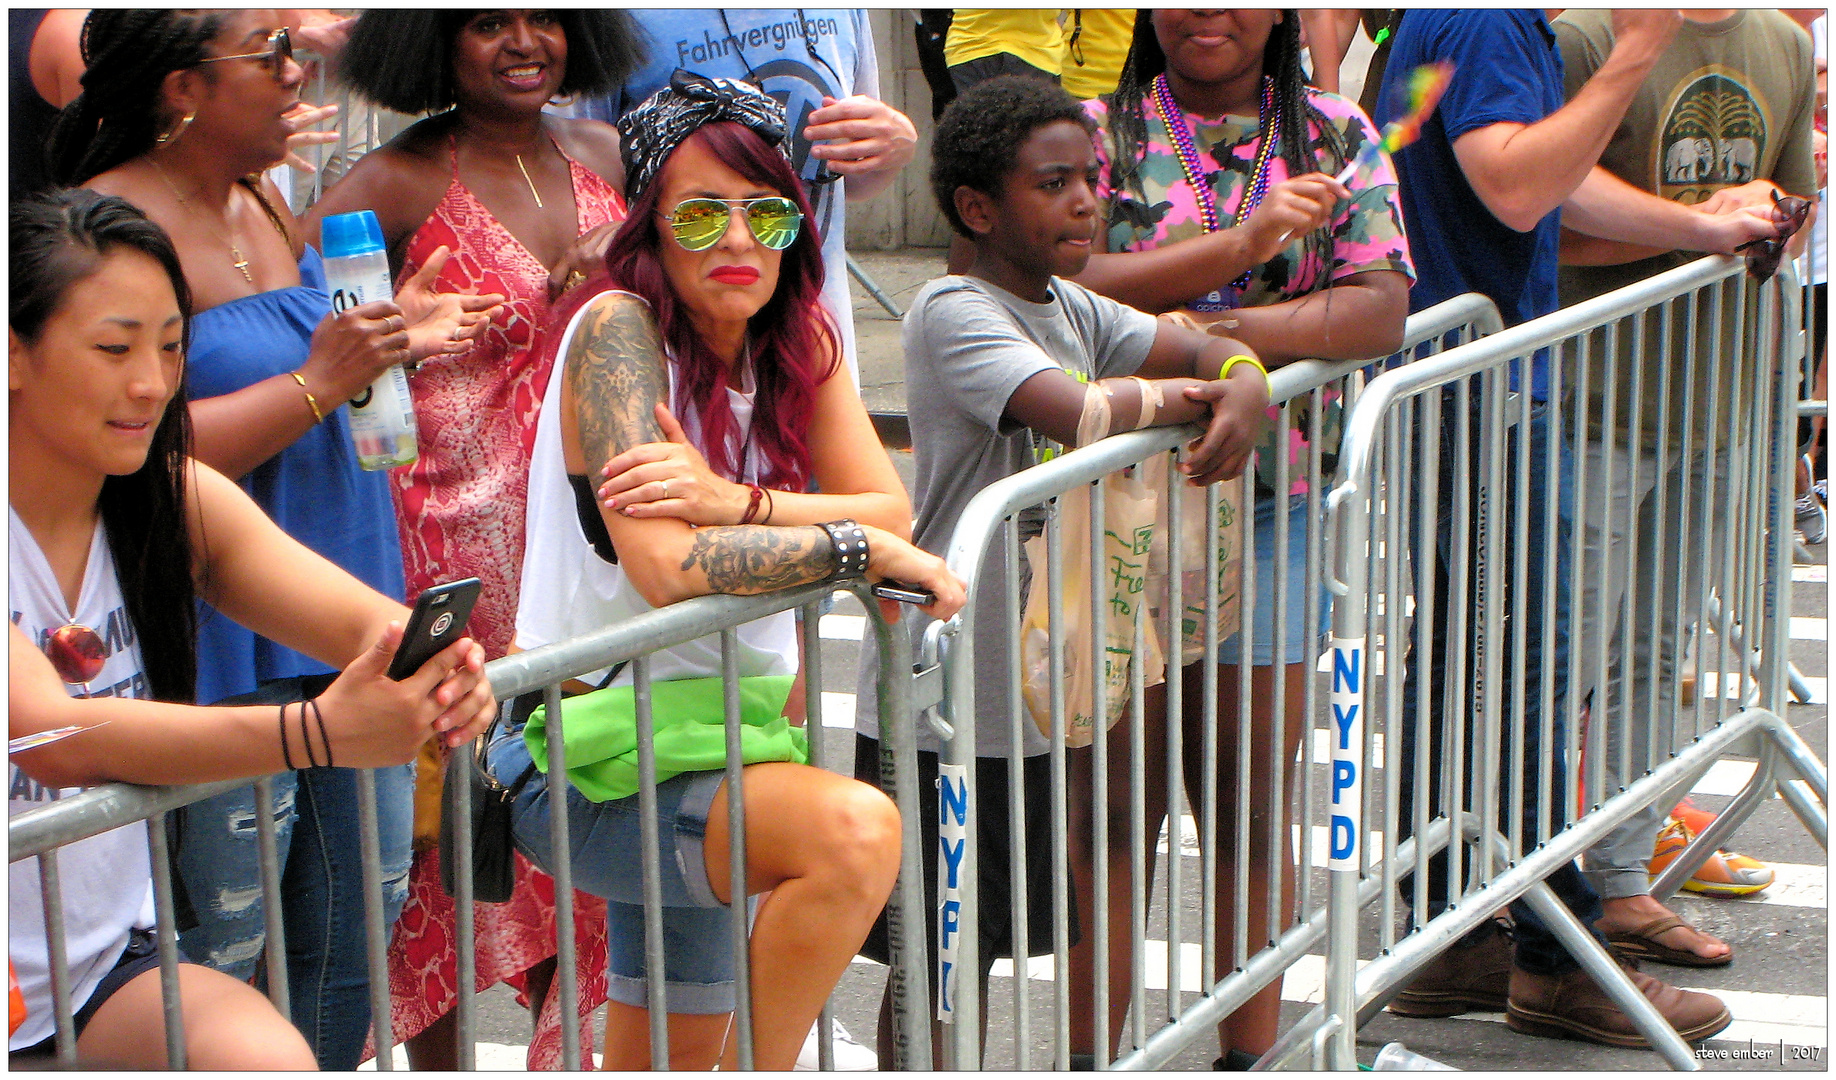 Pride-ful Moments along a Parade Route - No.1